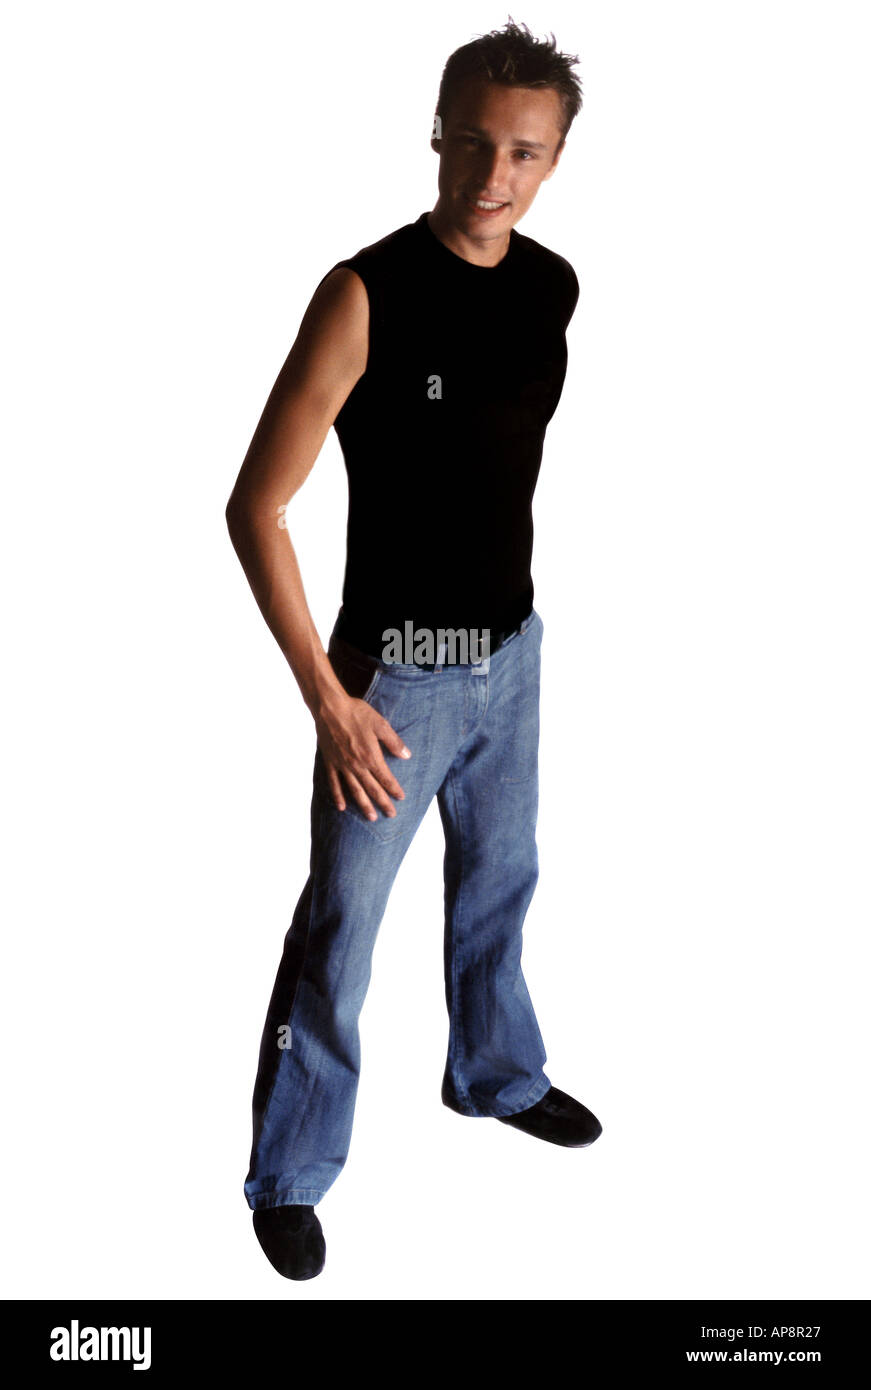 young man with jeans and black t shirt stand up looking camera on blank background Stock Photo